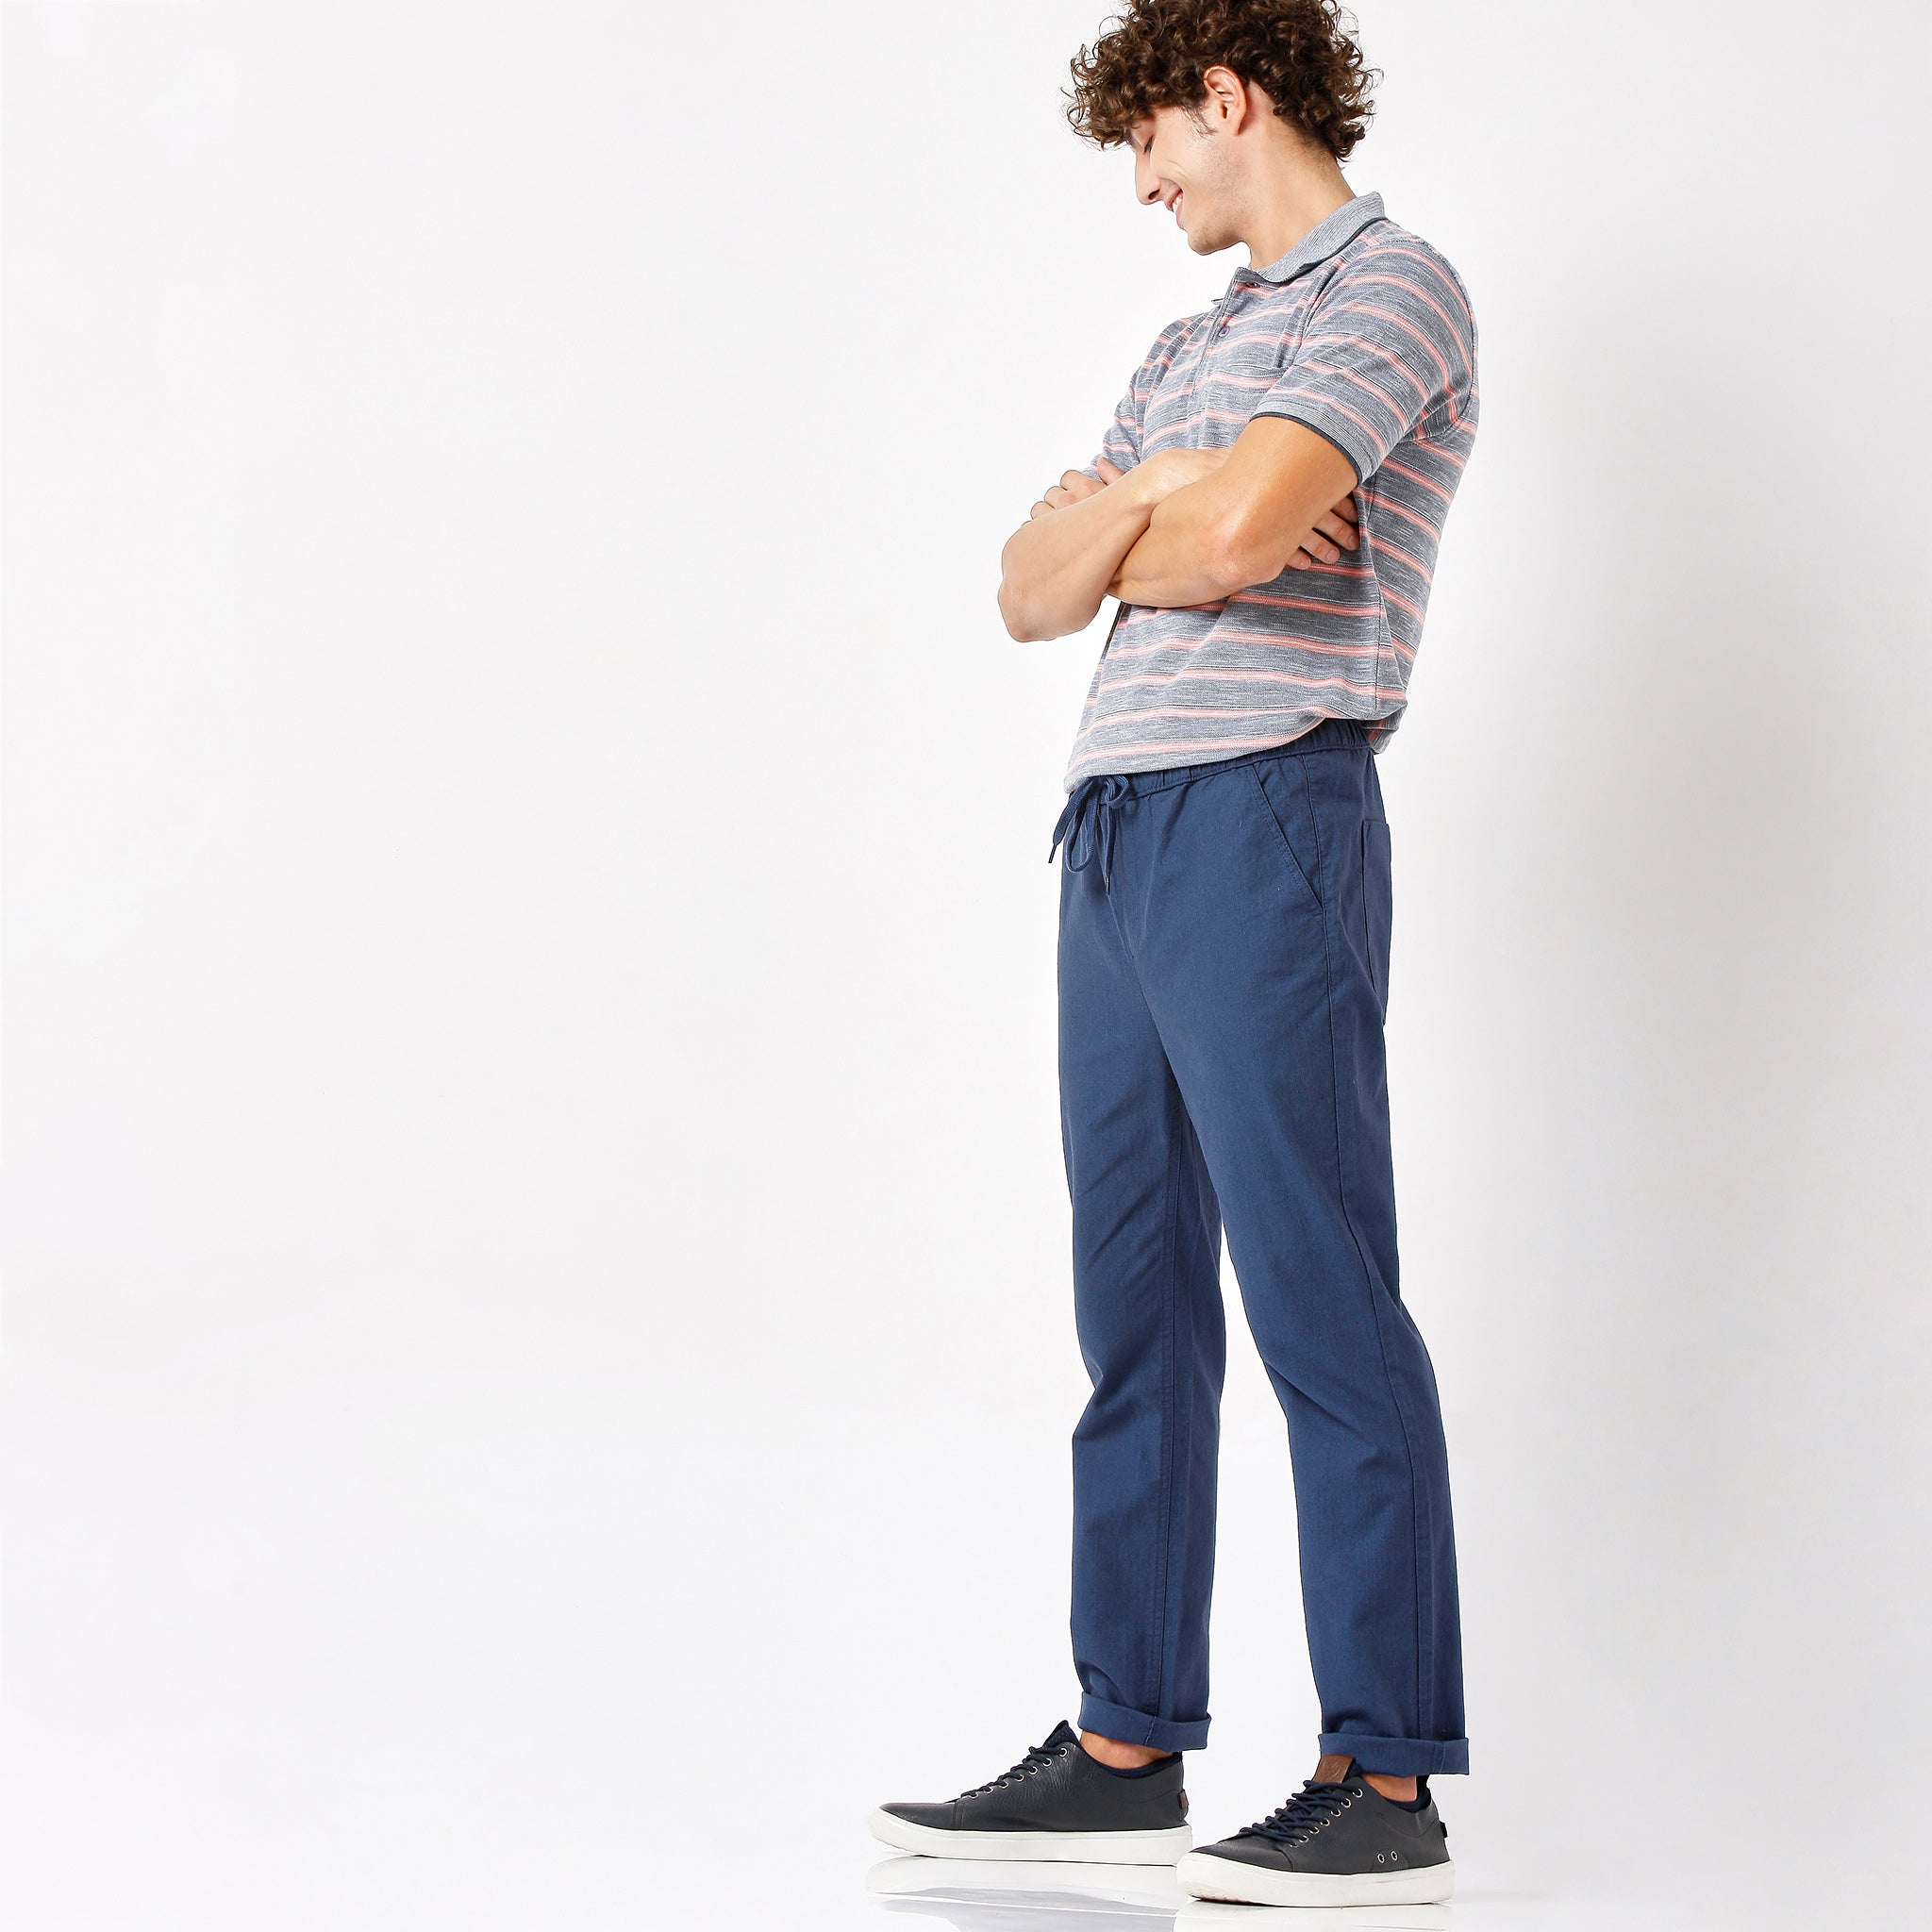 Men Wearing Slim Fit Solid Mid Rise Chinos